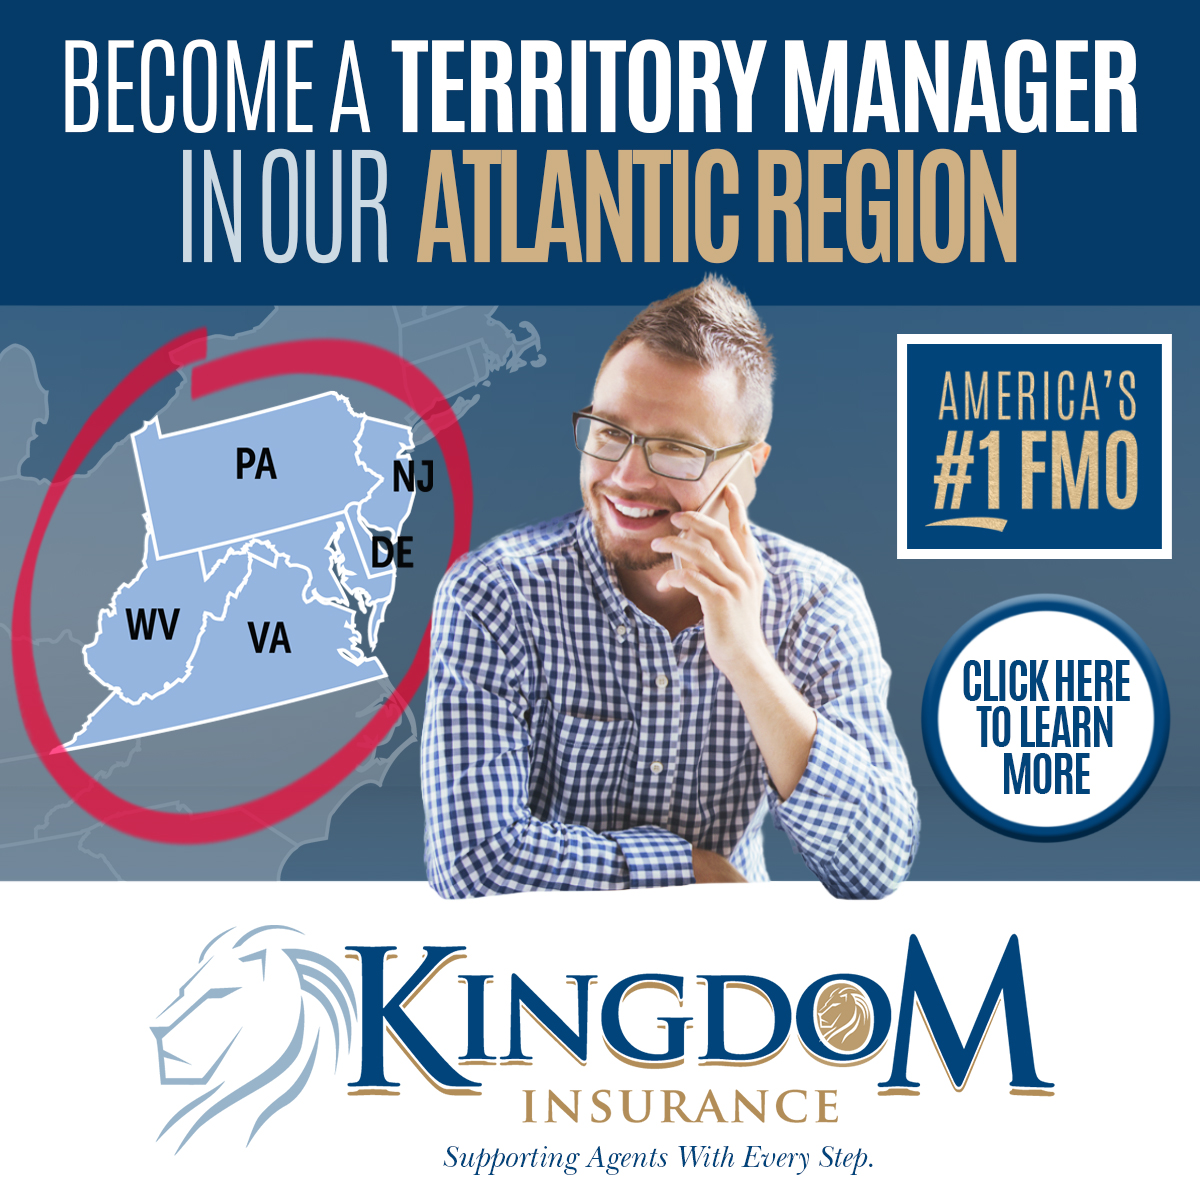 Become a Territory Manager in our Atlantic Region. American's #1 FMO. Click here to learn more. Kingdom Insurance. Supporting agents with every step.